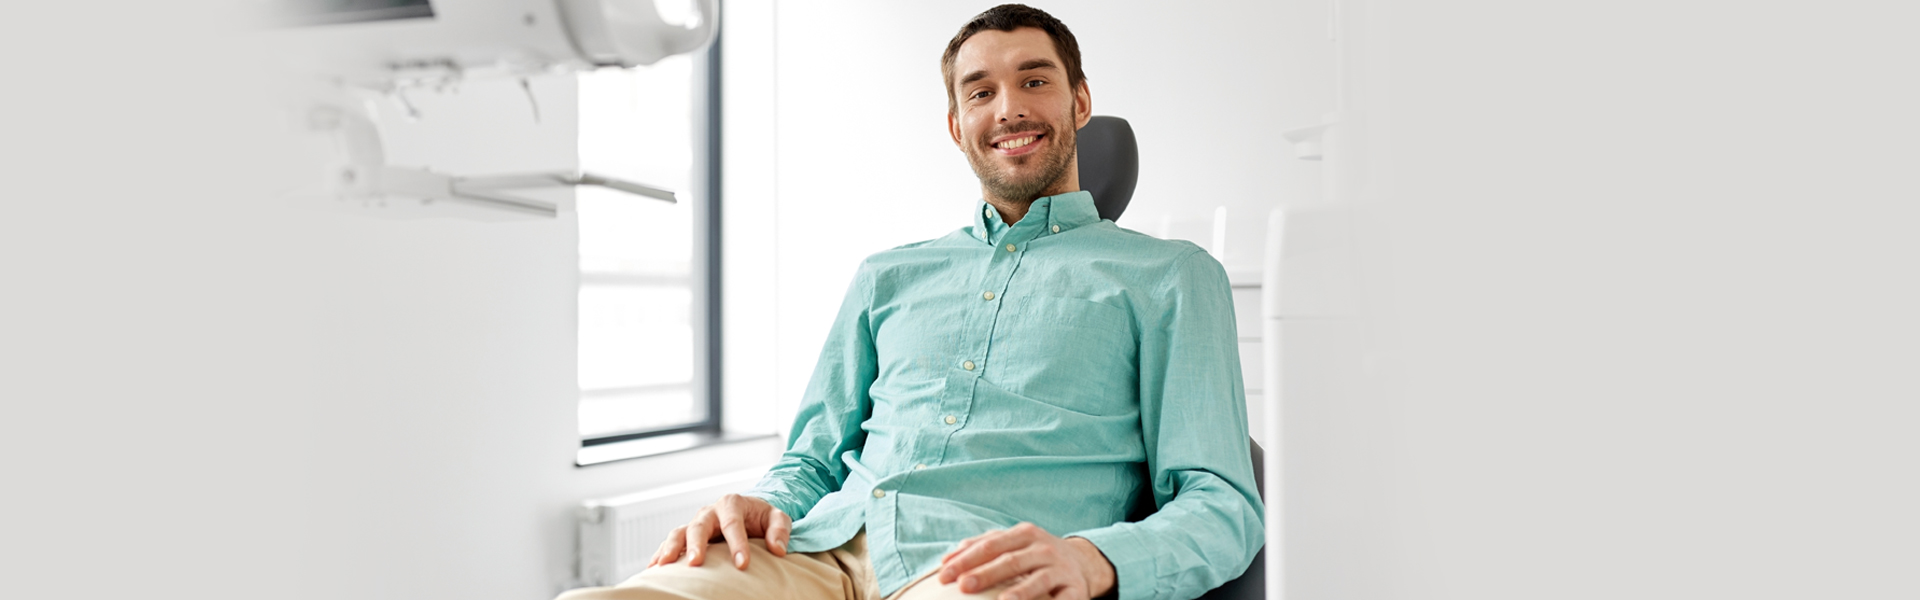 Different Types Of Restorative Dentistry Services